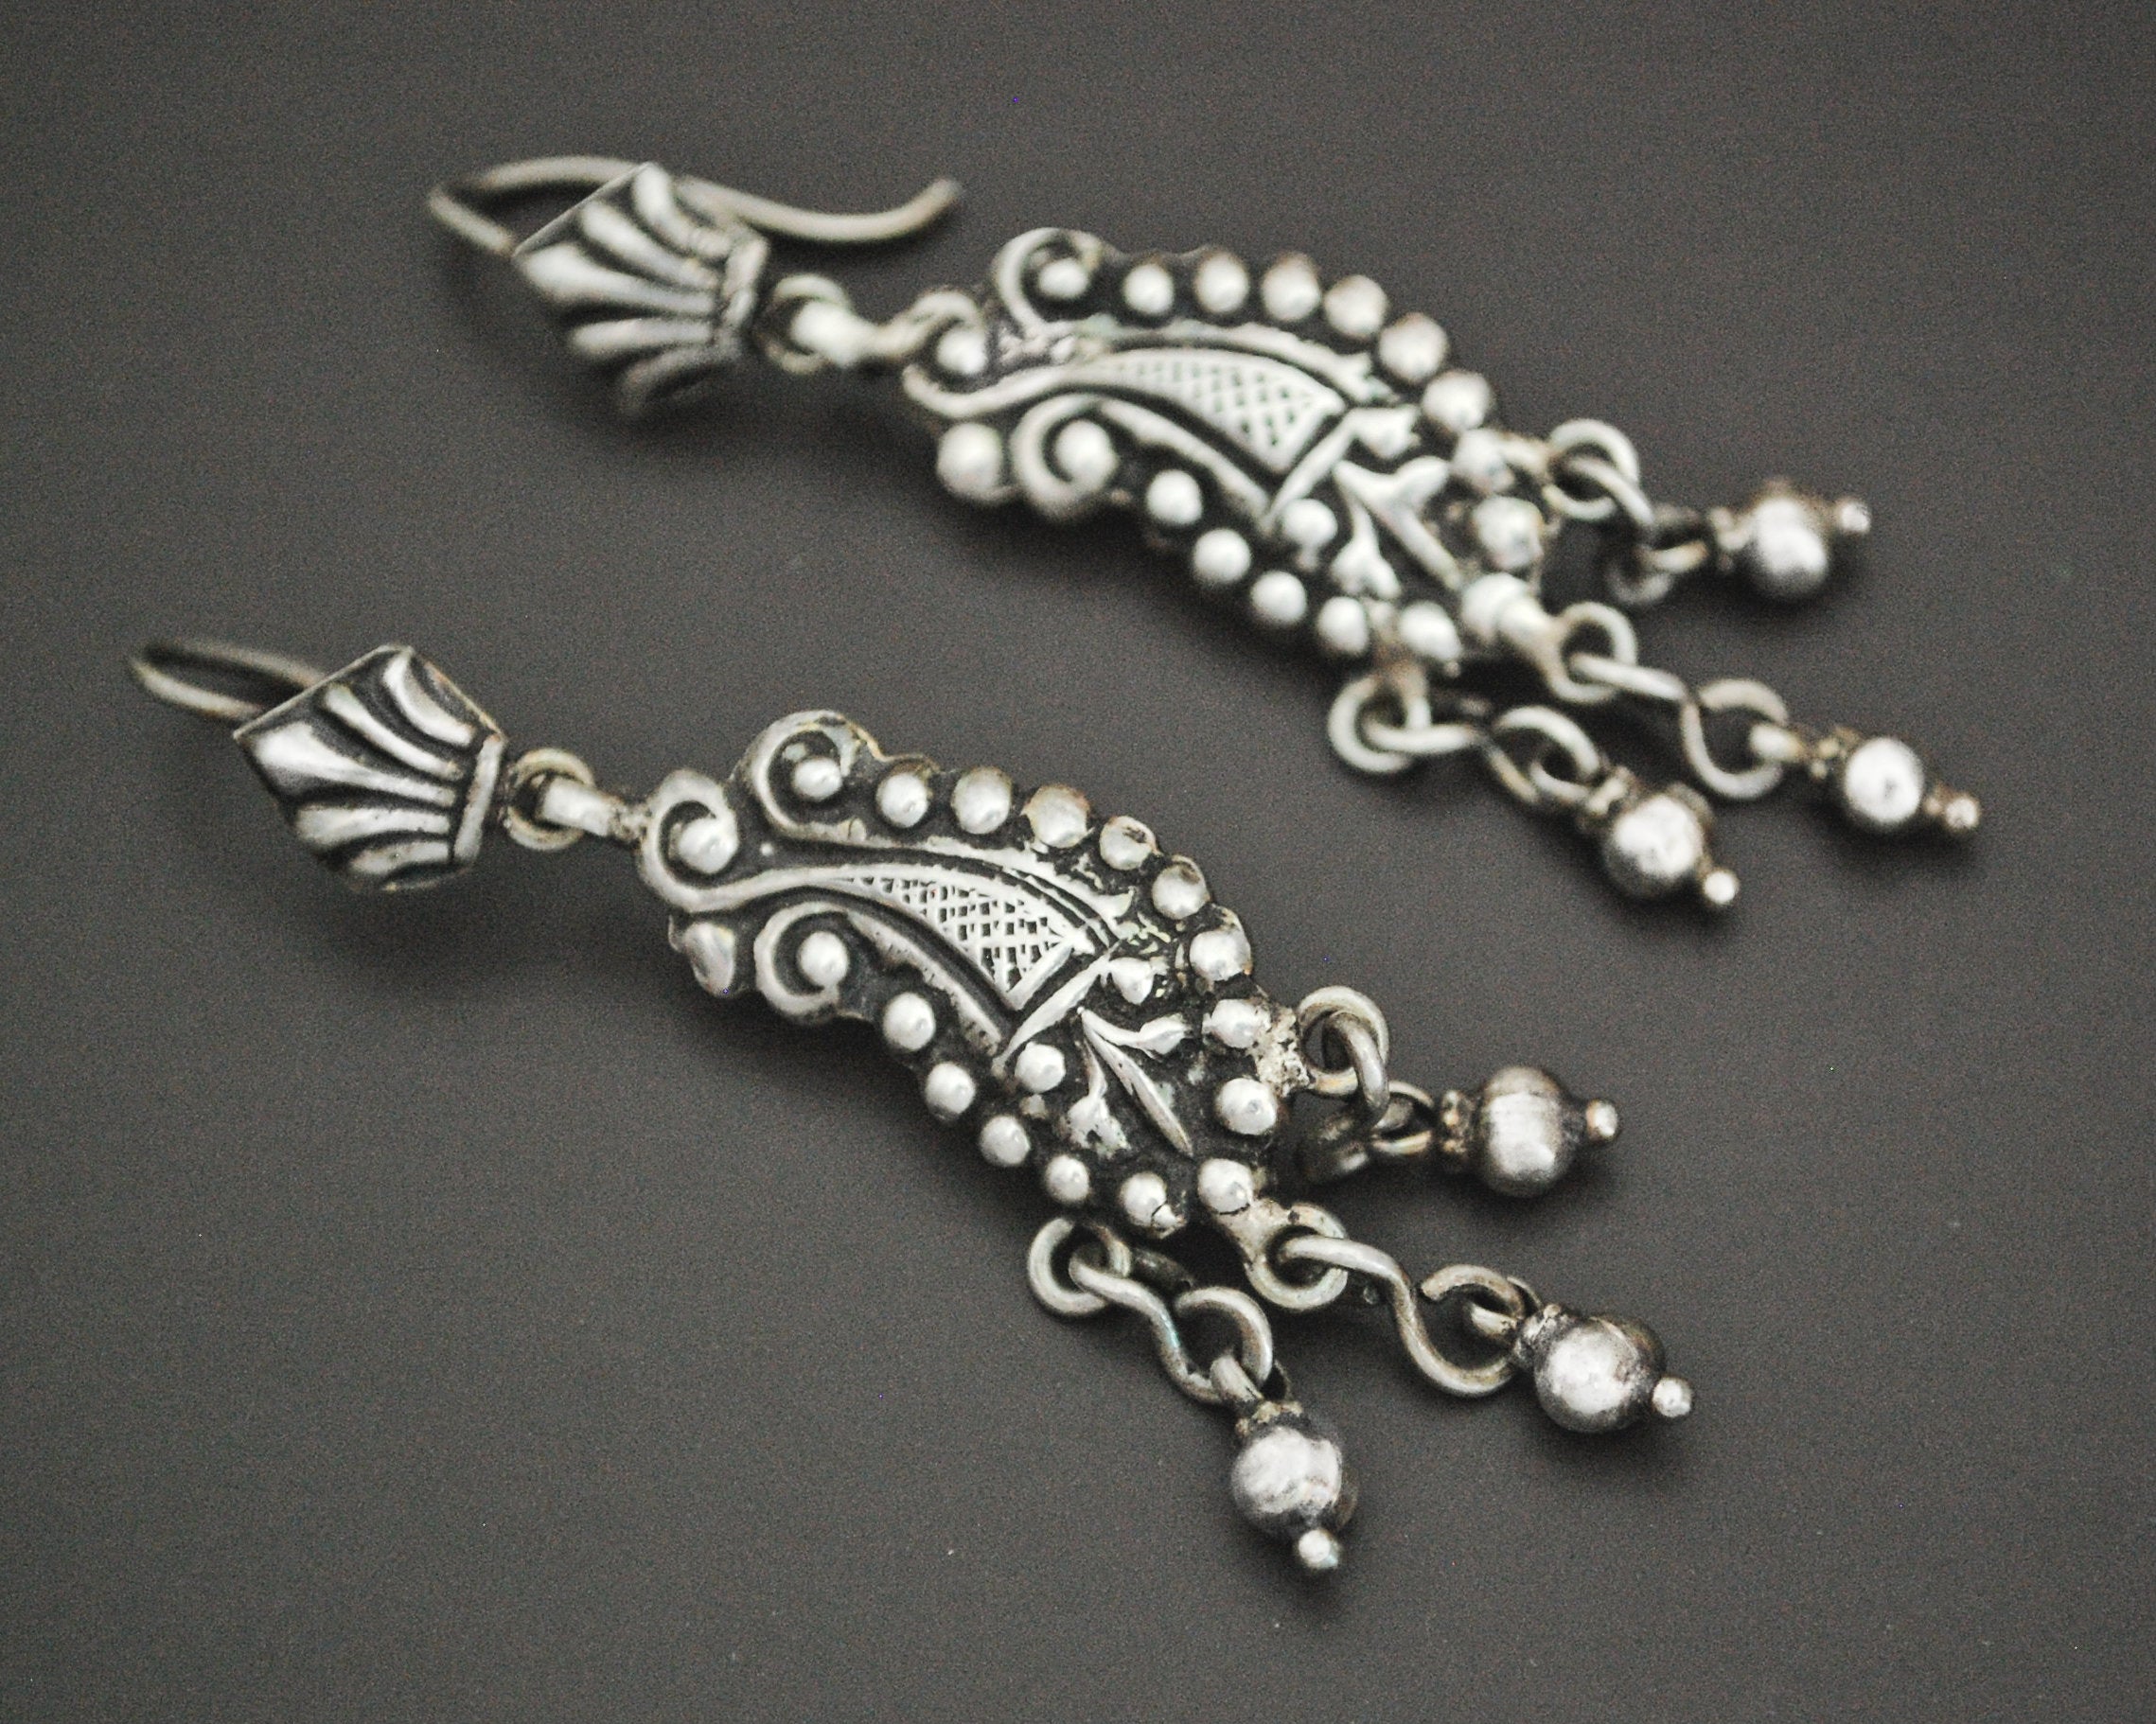 Rajasthani Silver Paisley Earrings with Dangles